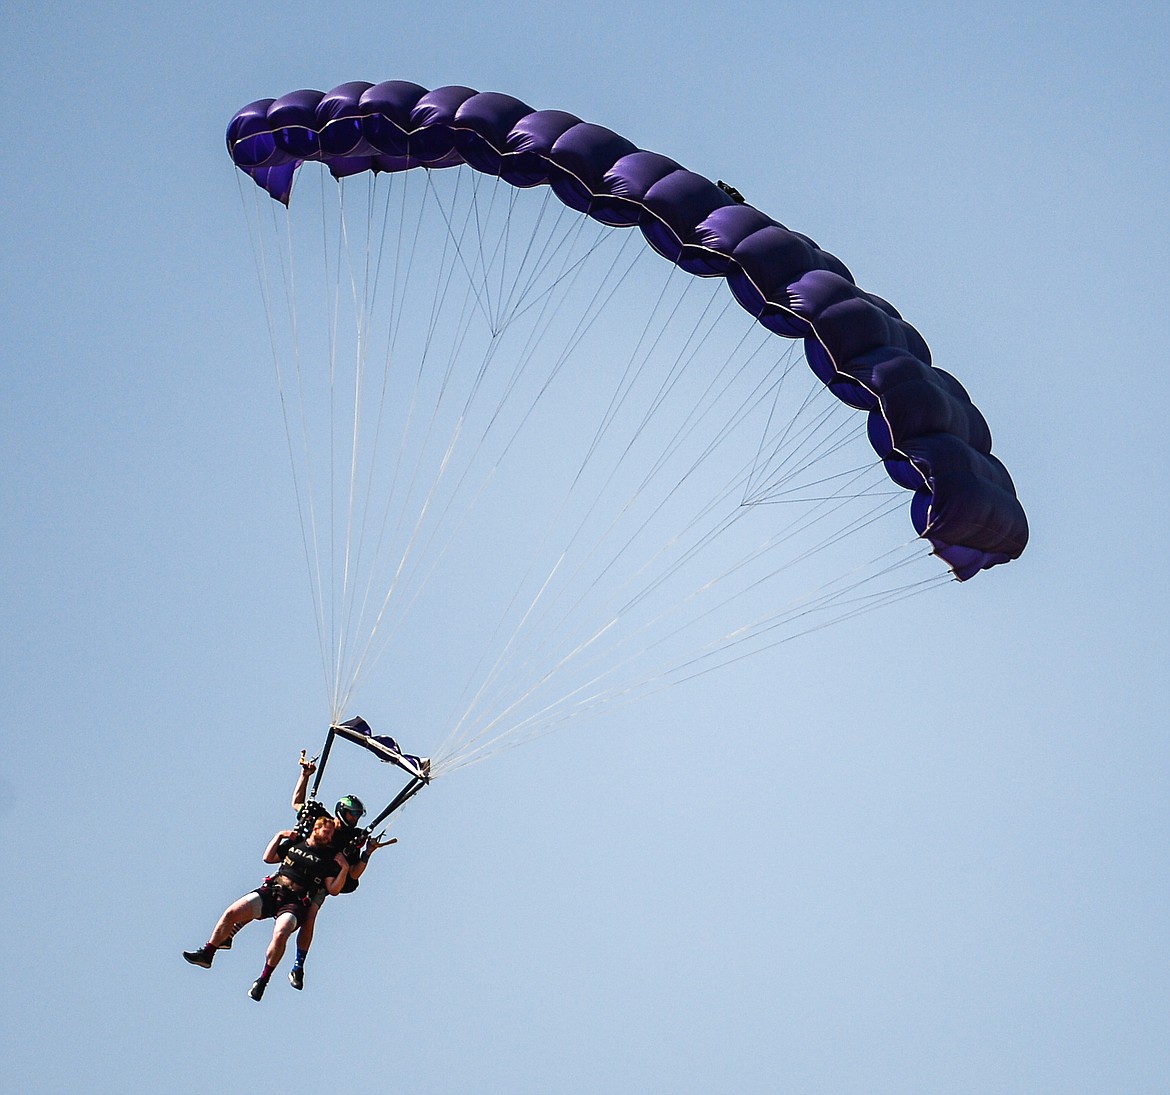 Tandem skydivers descend over the 2021 Skydive Lost Prairie Boogie at Meadow Peak Skydiving near Marion on Thursday, Aug. 12, 2021. (Casey Kreider/Daily Inter Lake)